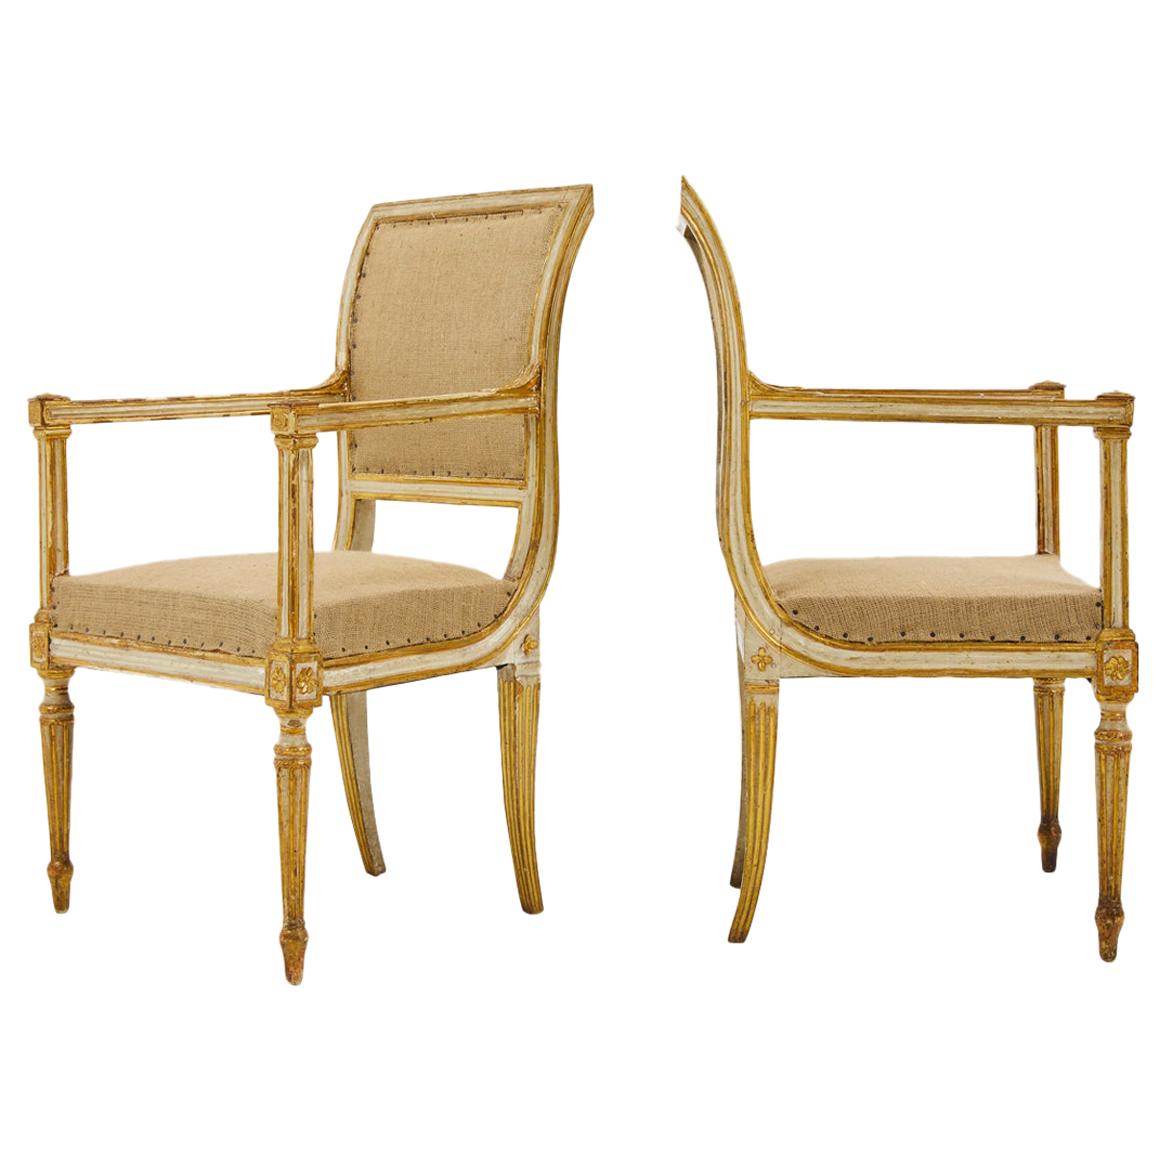 Pair of 18th Century Italian Painted and Gilt Armchairs For Sale